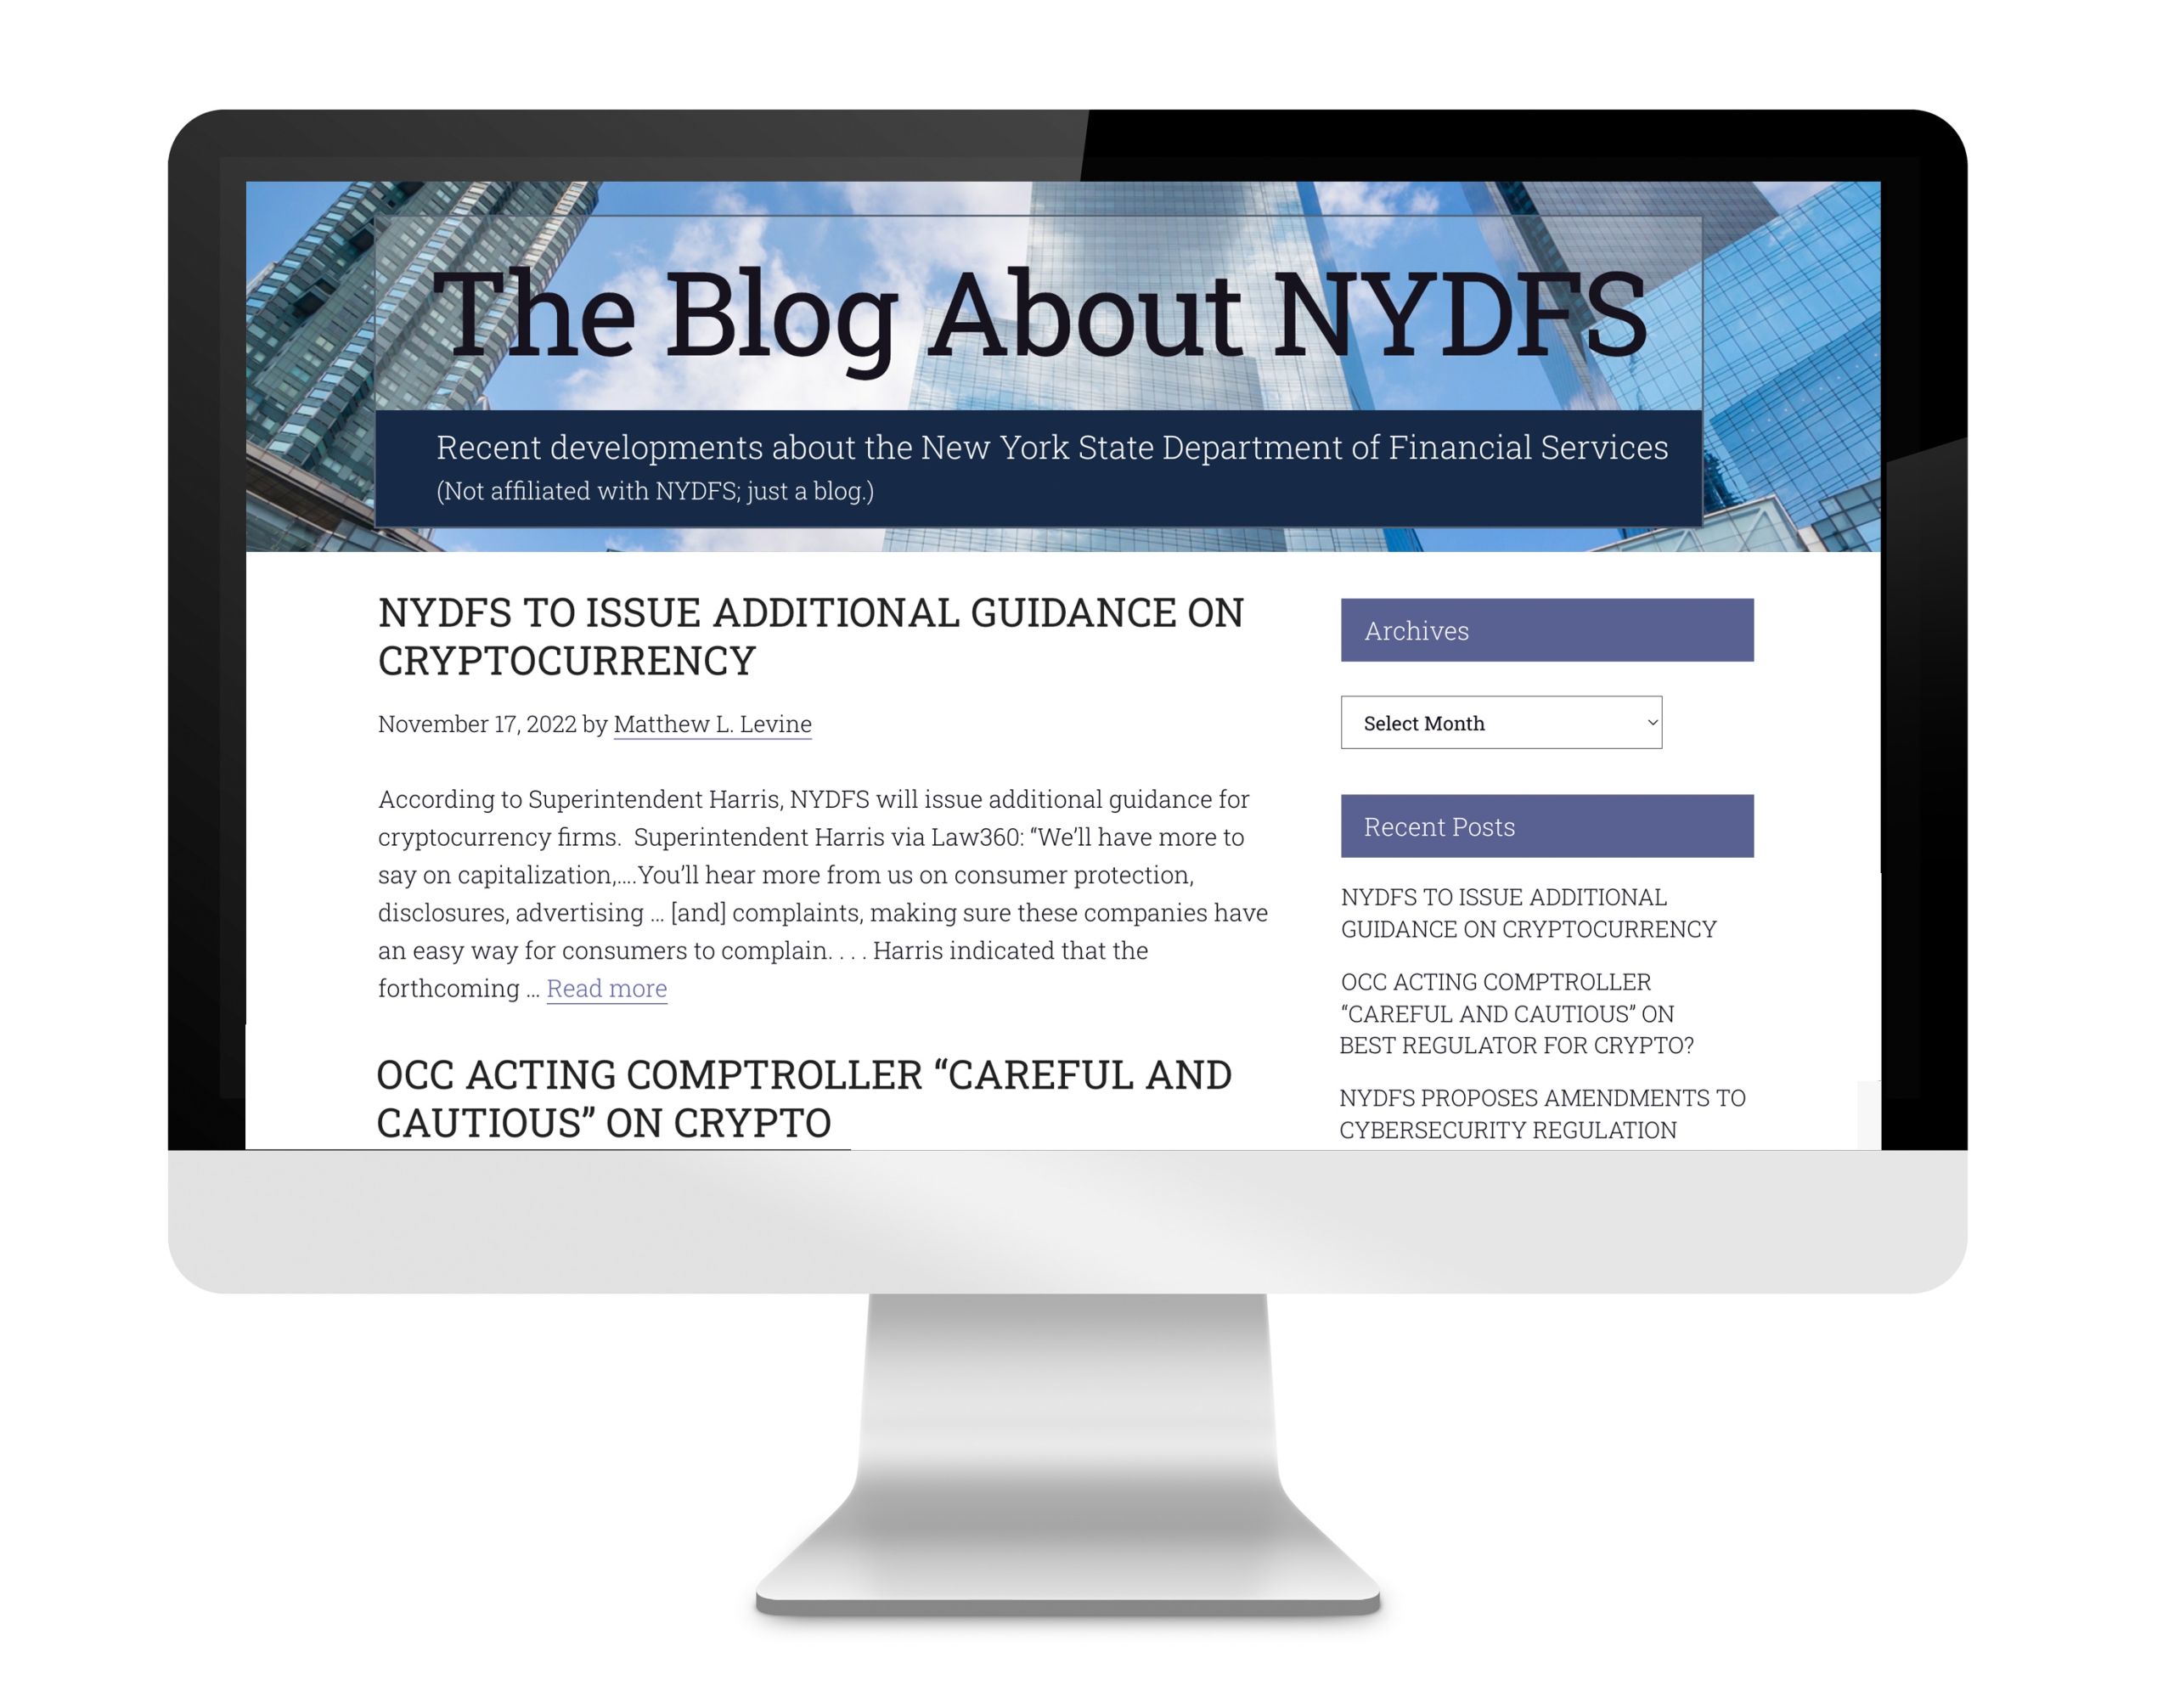 The Blog About NYDFS website designed by DLS Design.